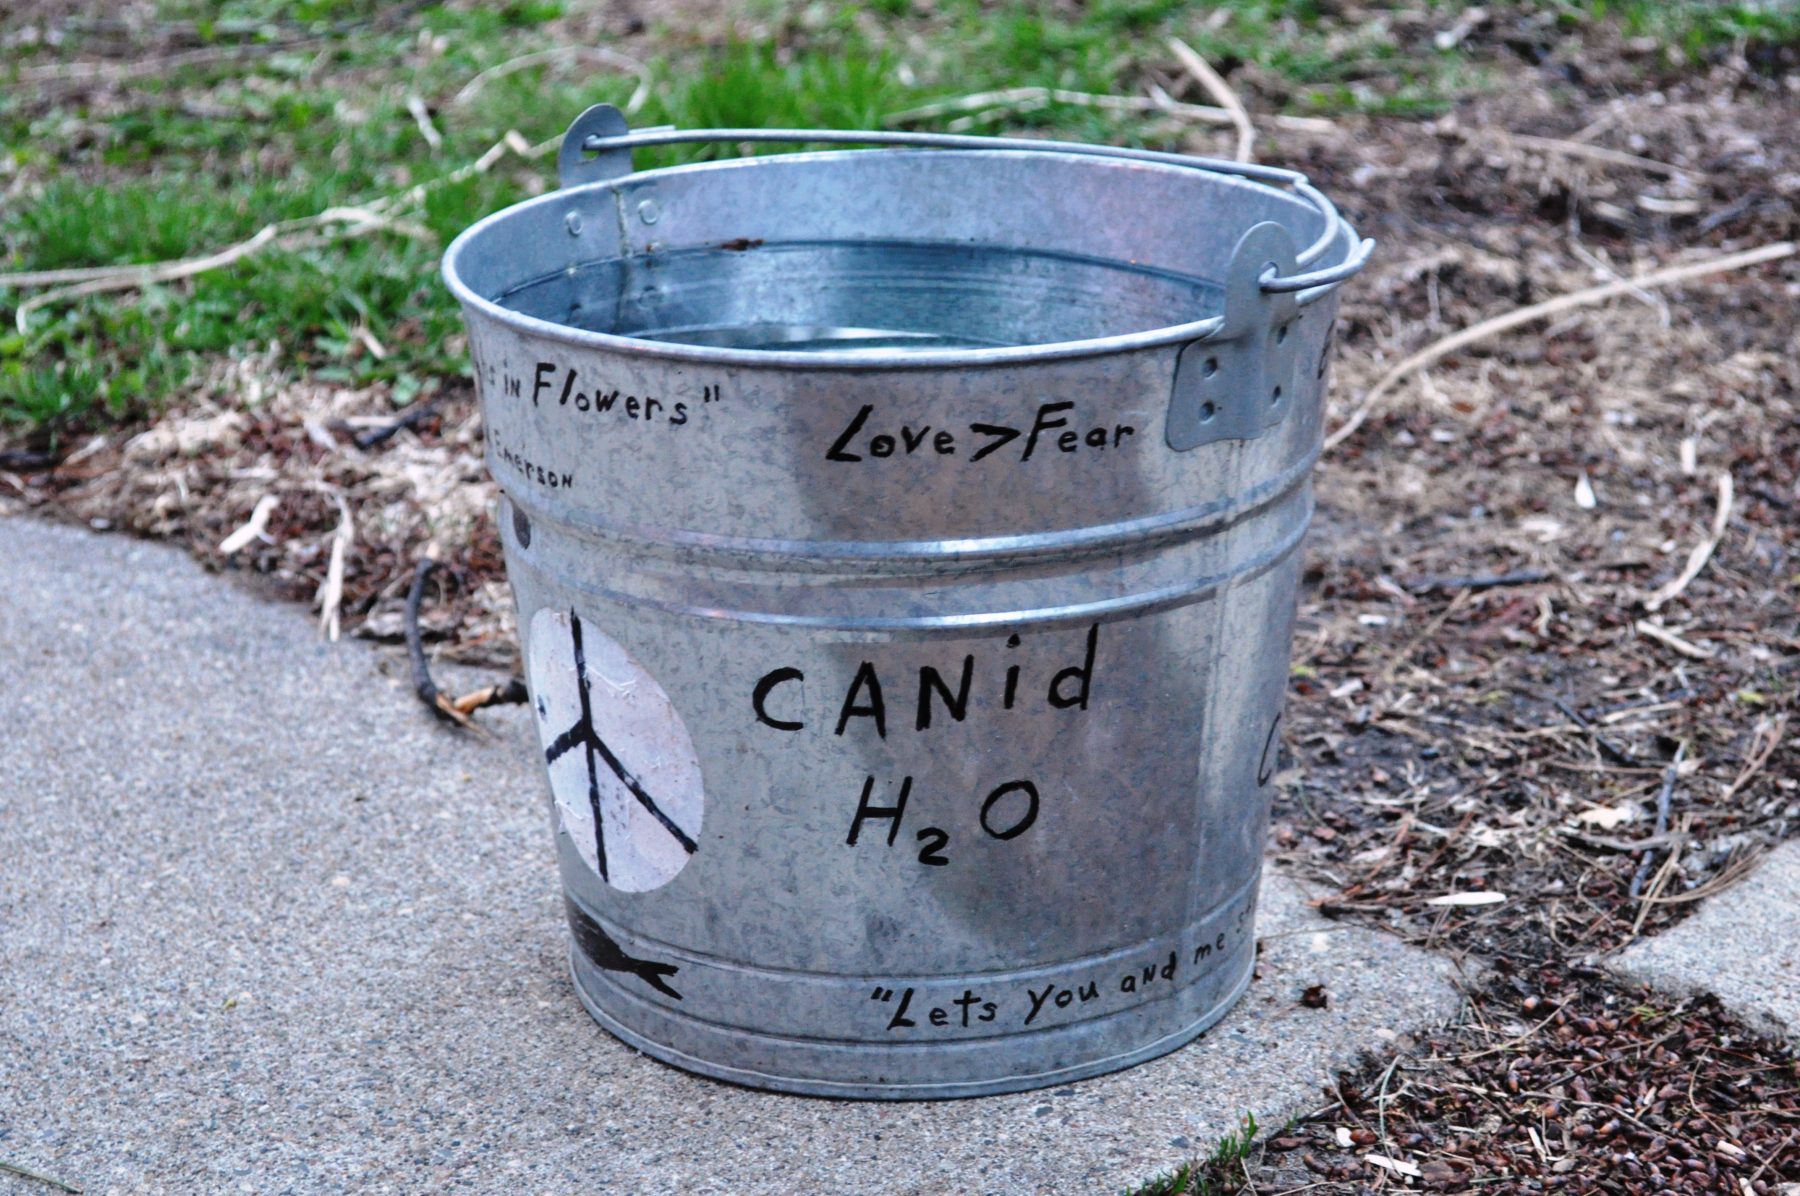 Canid H20